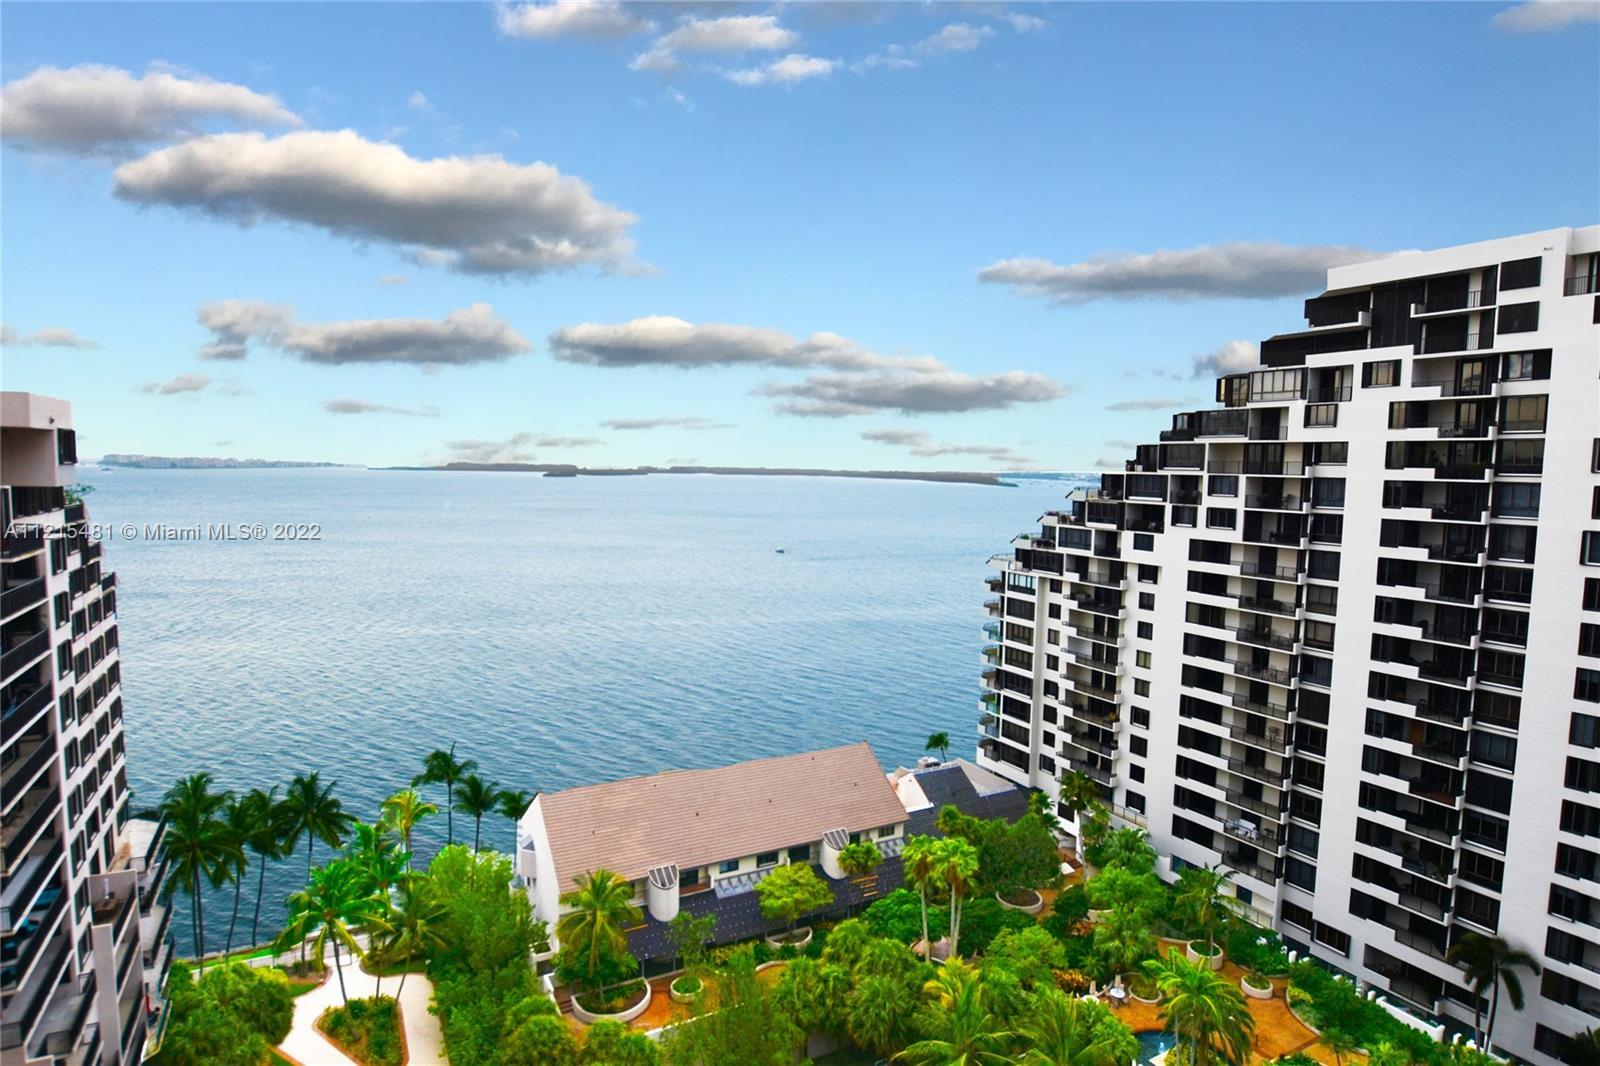 Island Penthouse with endless water views from this immaculate 2bed/2bath apartment on the gated isl